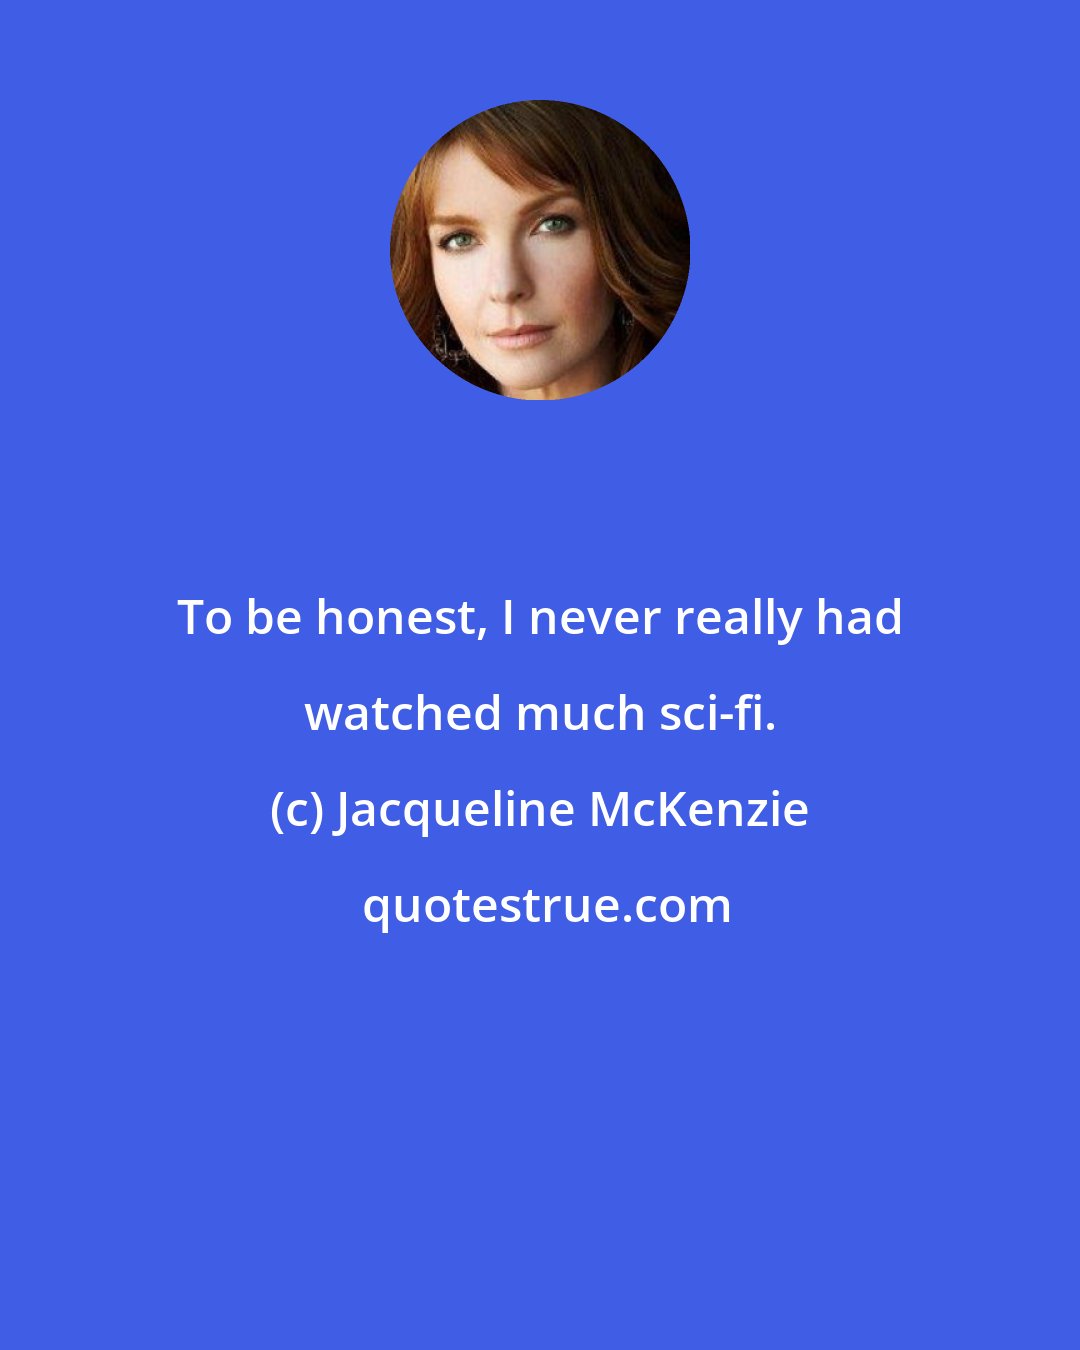 Jacqueline McKenzie: To be honest, I never really had watched much sci-fi.